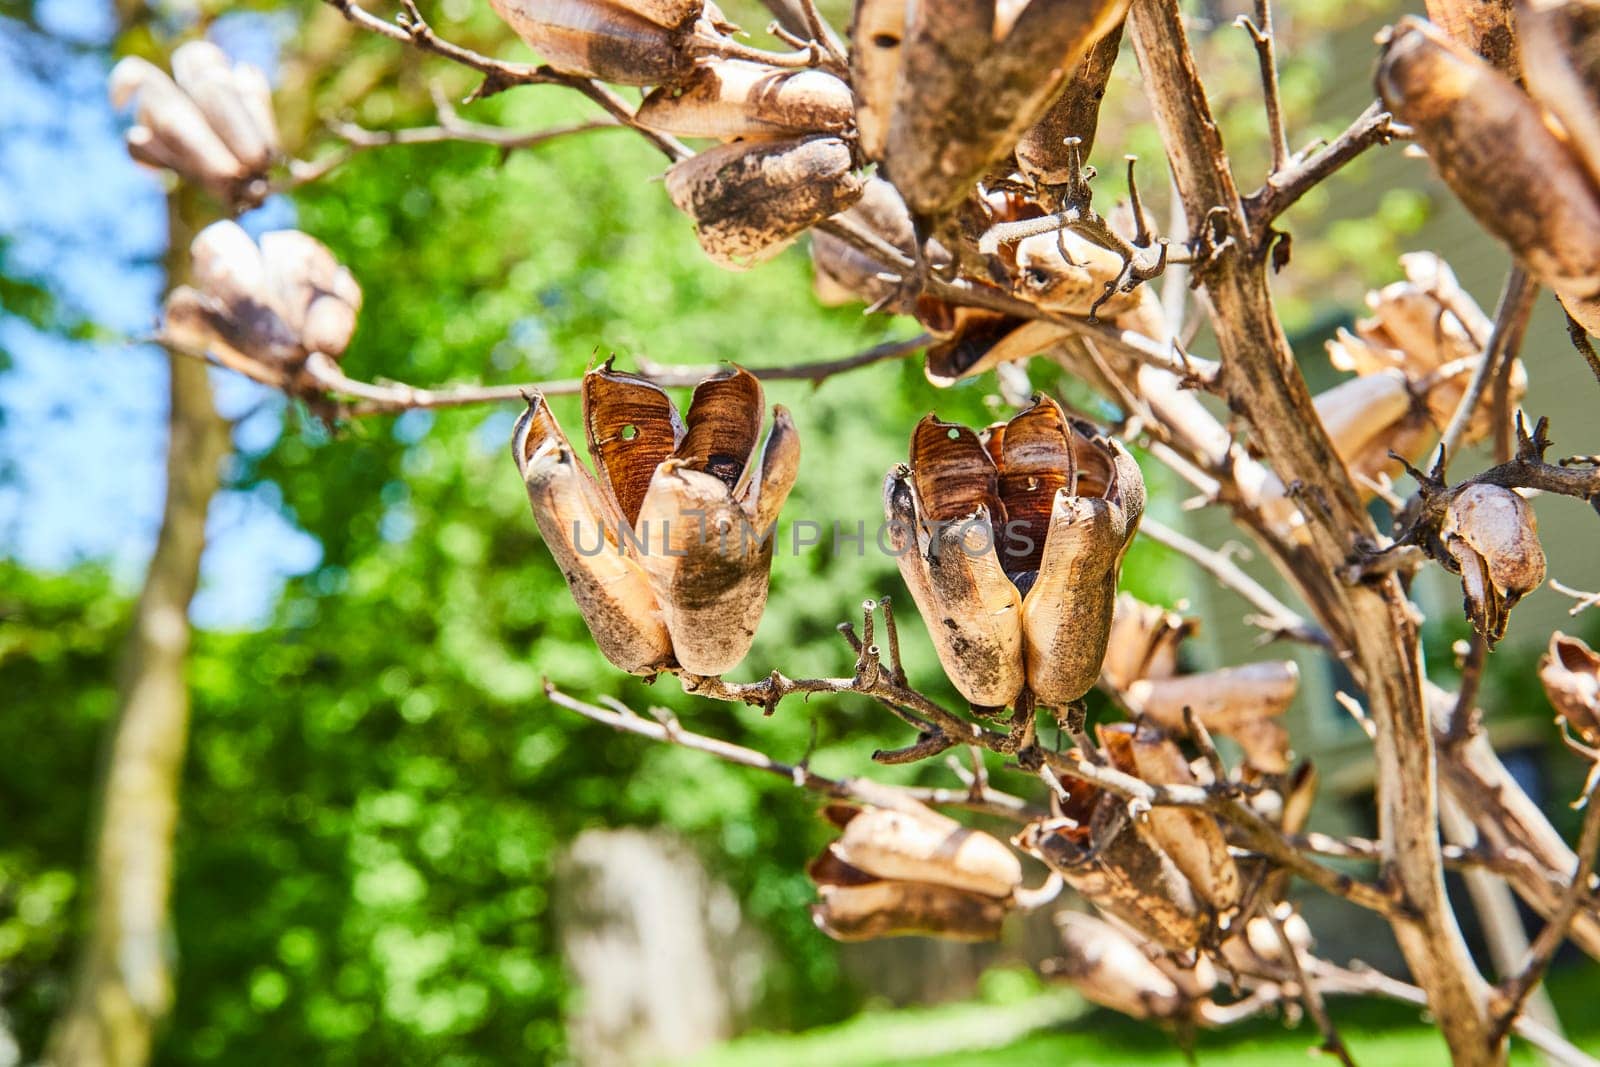 Yucca seed pods stand out in a historic Fort Wayne garden, highlighting nature's cycles and beauty.